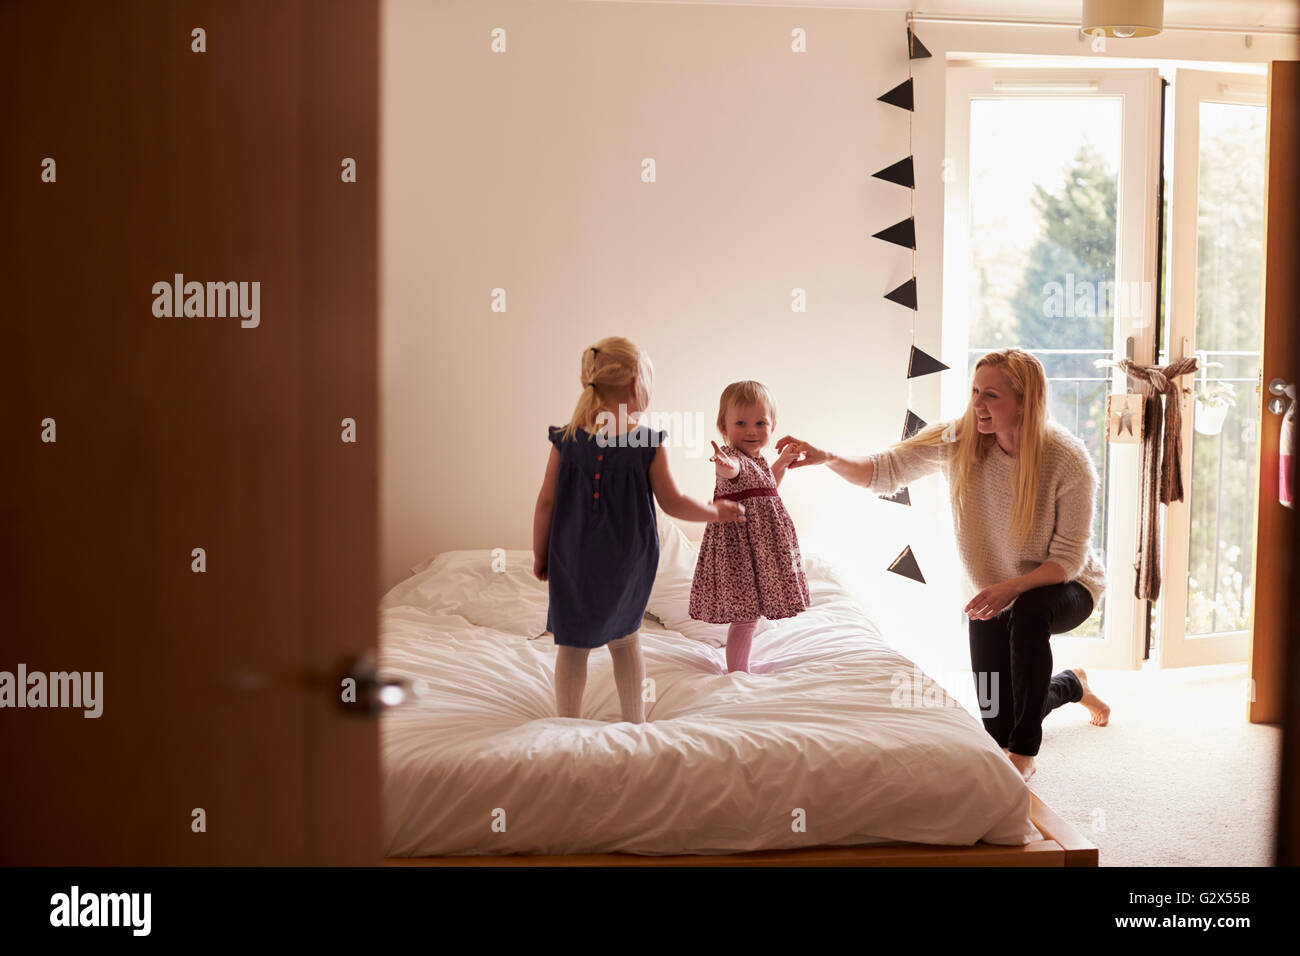 Mother Playing Game With Daughters In Bedroom Stock Photo